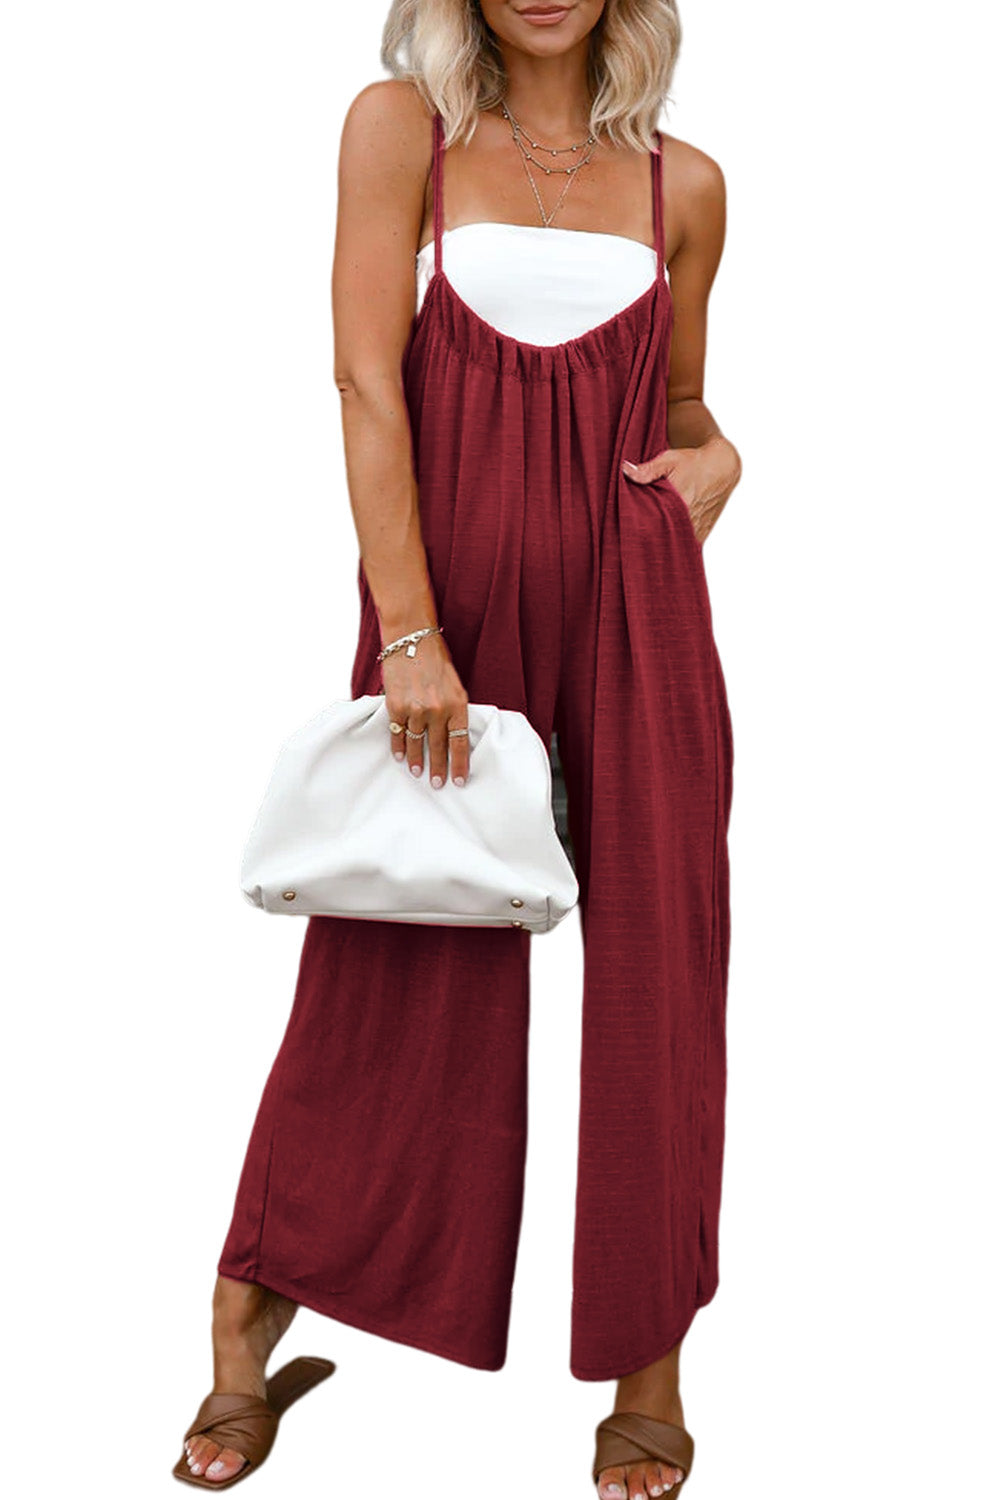 Red Casual Spaghetti Strap Backless Wide Leg Jumpsuit